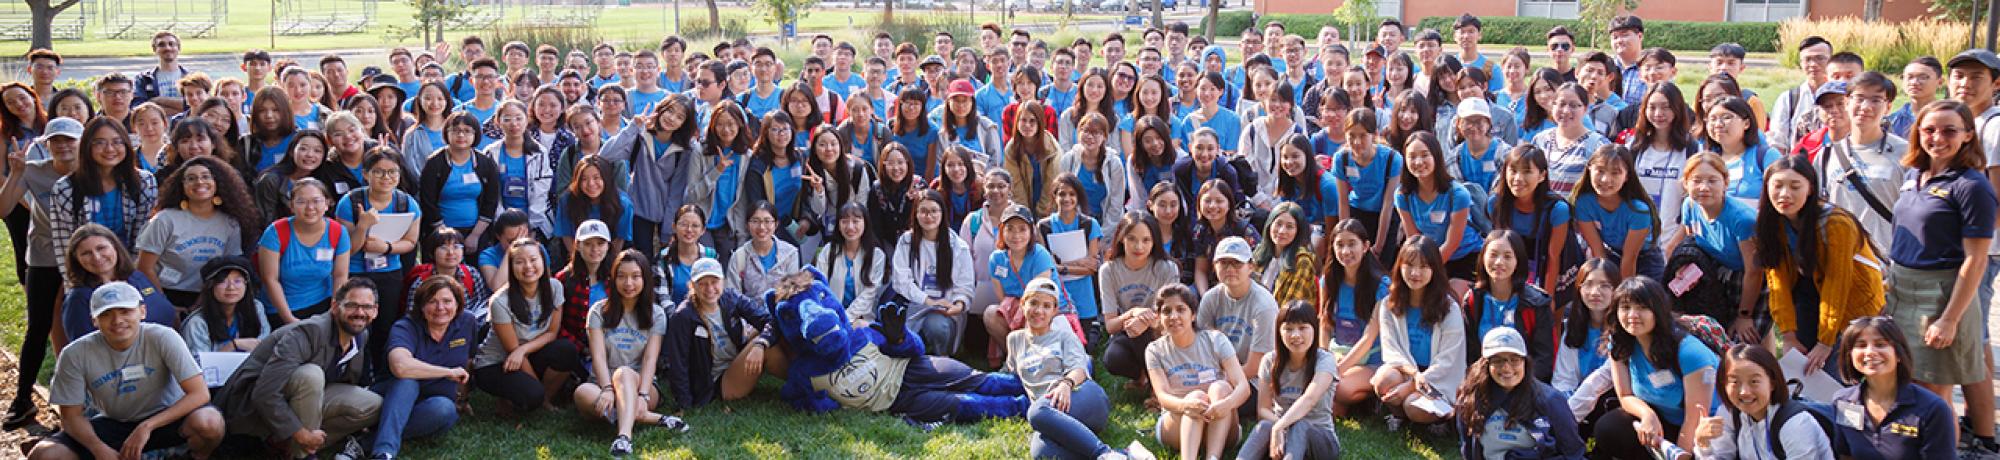 A group photo of close to 200 students gathered in a half circle on a lawn surrounded by trees on the sides. 